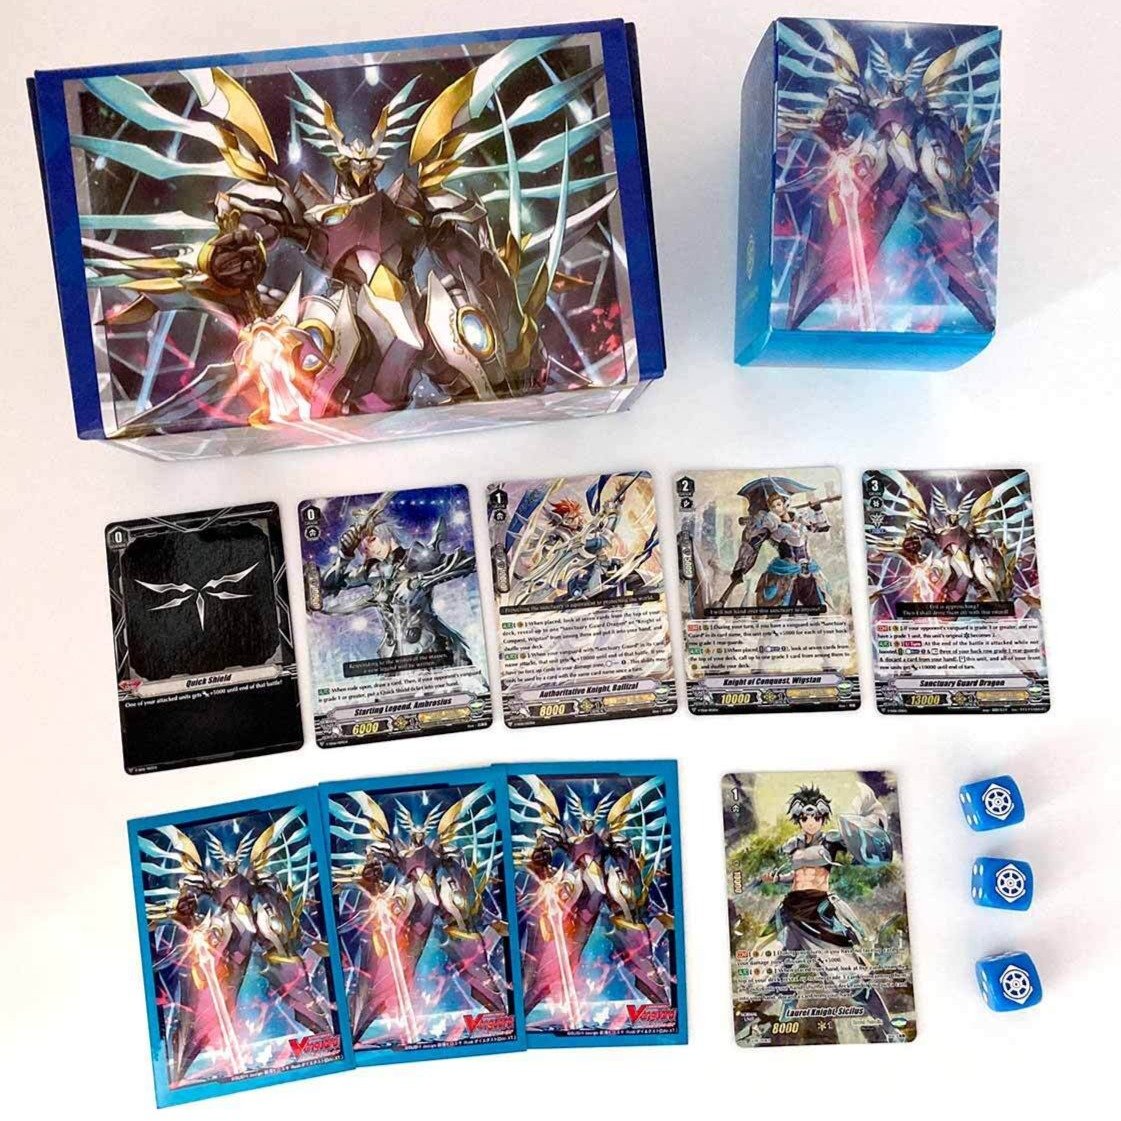 Cardfight!! Vanguard V Special Series "Valiant Sanctuary" [VGE-V-SS06] (English)-Bushiroad-Ace Cards & Collectibles